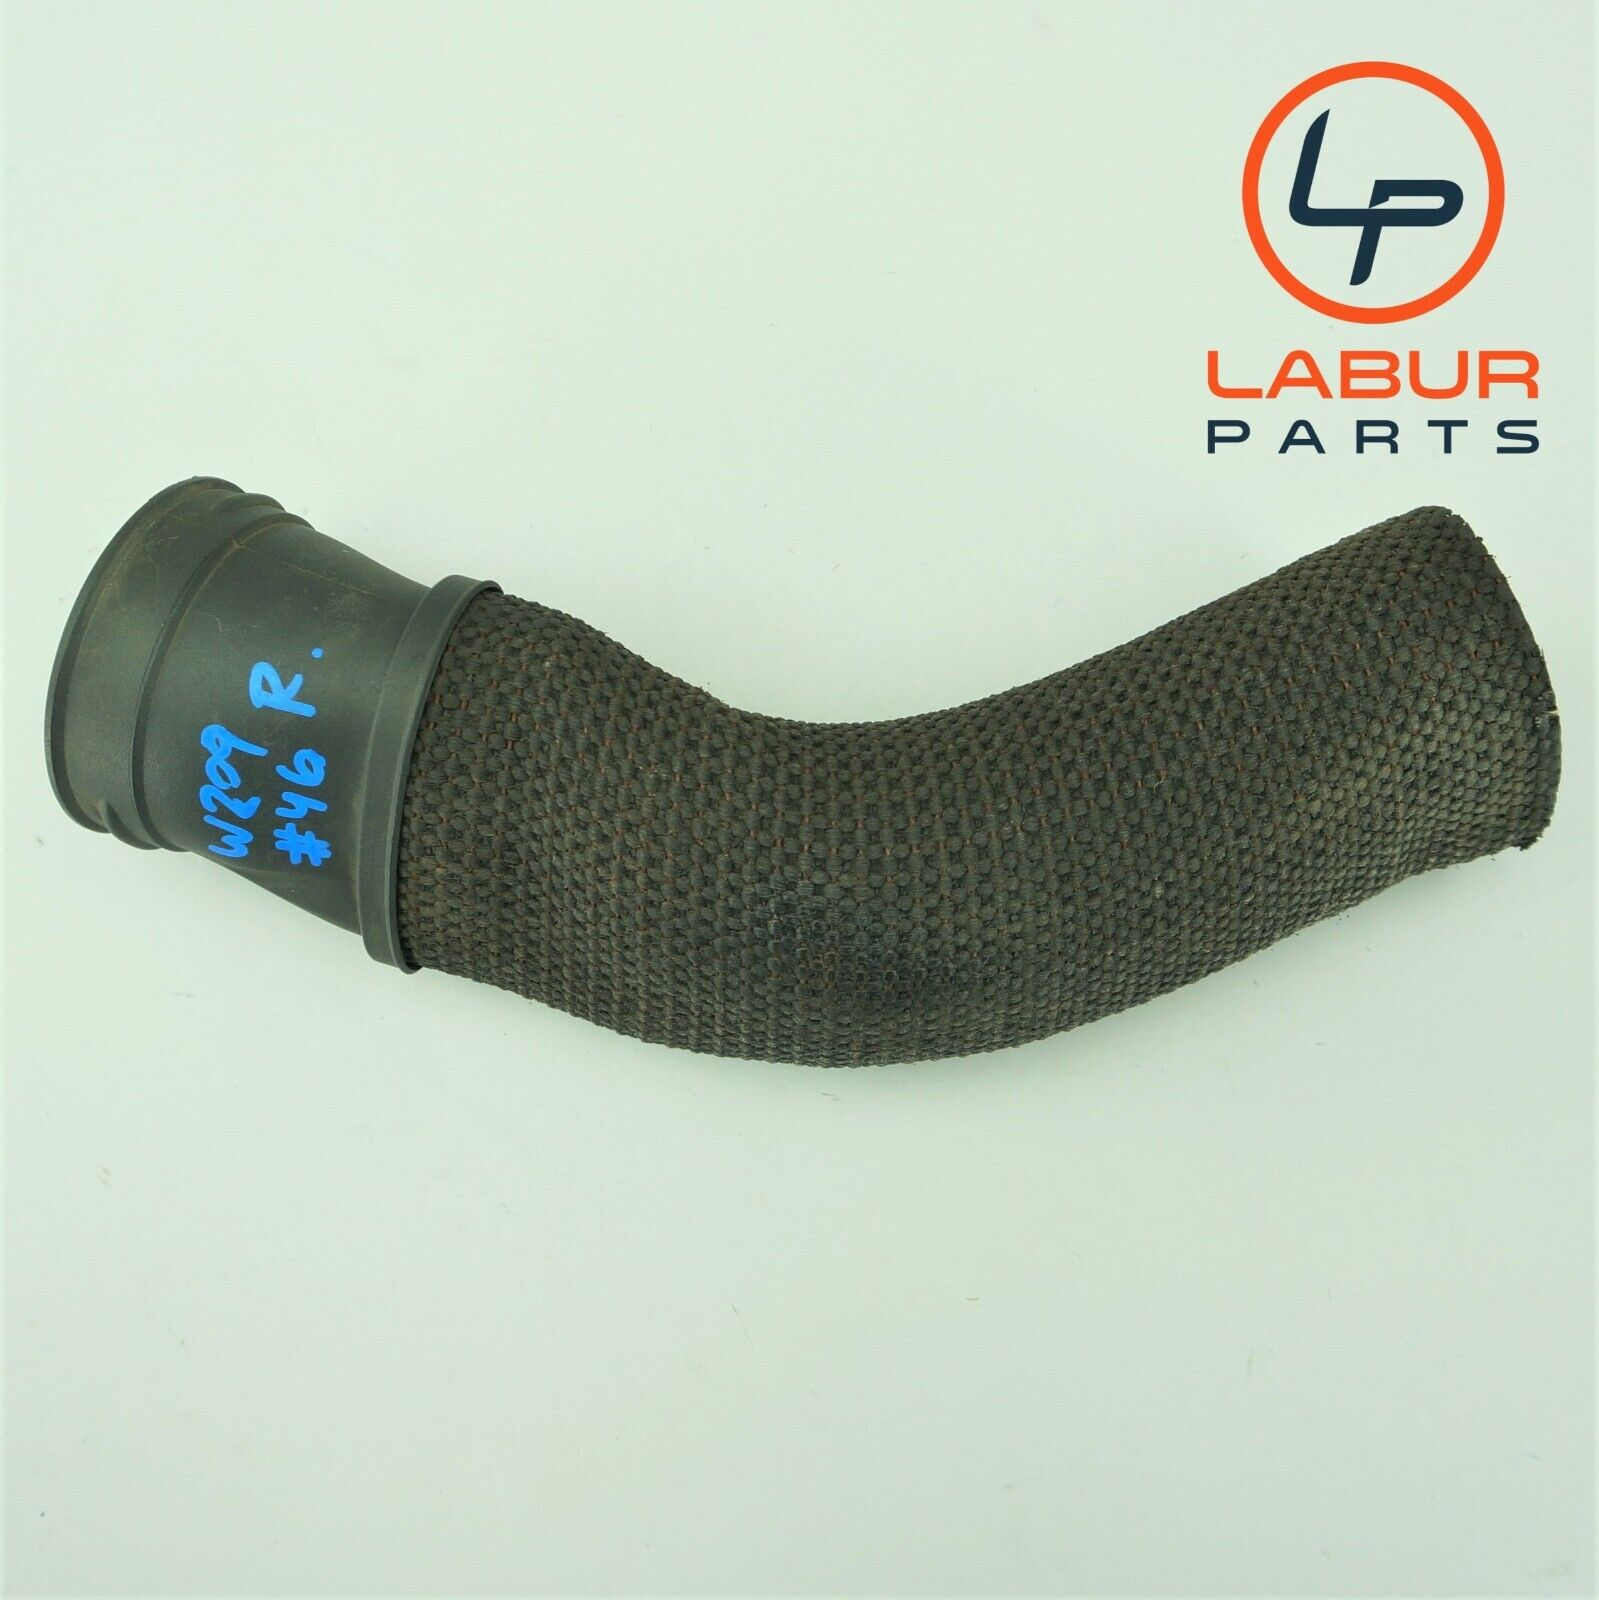 +A1952 W209 MERCEDES 06-09 CLK CLASS FRONT RIGHT PASSENGER SIDE AIR INTAKE DUCT